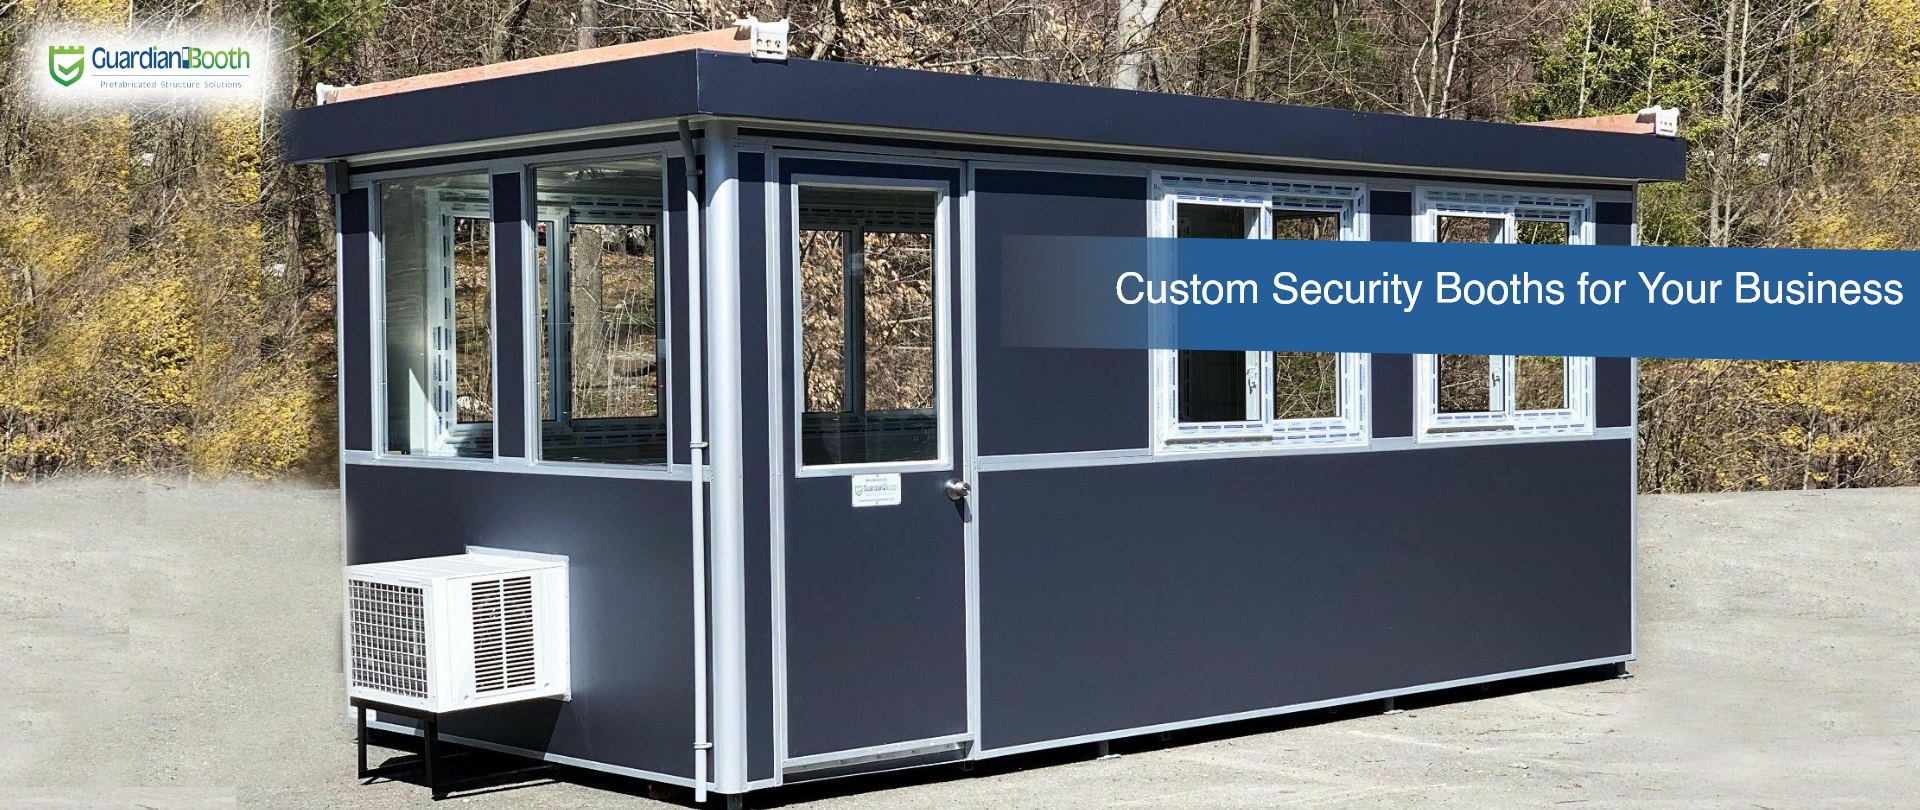 Custom Guard Booth for Business